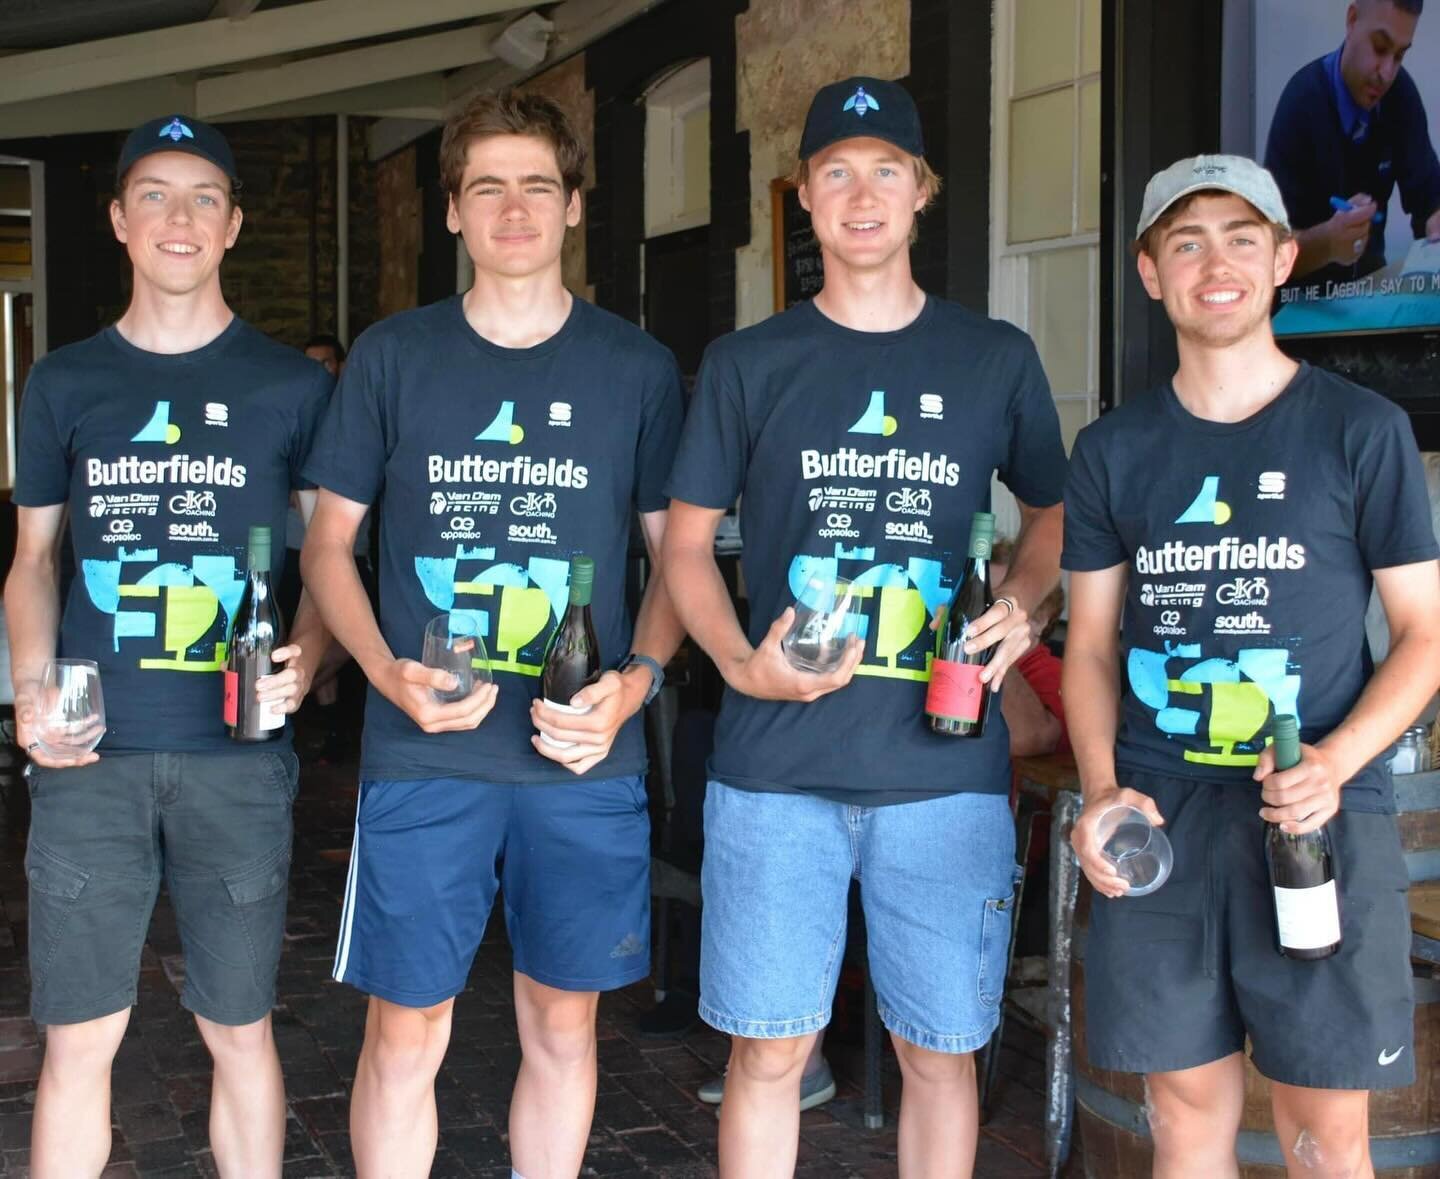 @adelaidehillscyclingclub Tour of Fleurieu was ON 🔥 

Open 1 ⭐️ 

@vandamracing Open 1 win Team Classification 🥇 PLUS @aston_freeth bought home 🥇 and @jackclarkk11 🥉 on GC 💪🏼

@vandamracing 🥇 TTT for stage 1, clean sweep of the podium for the 